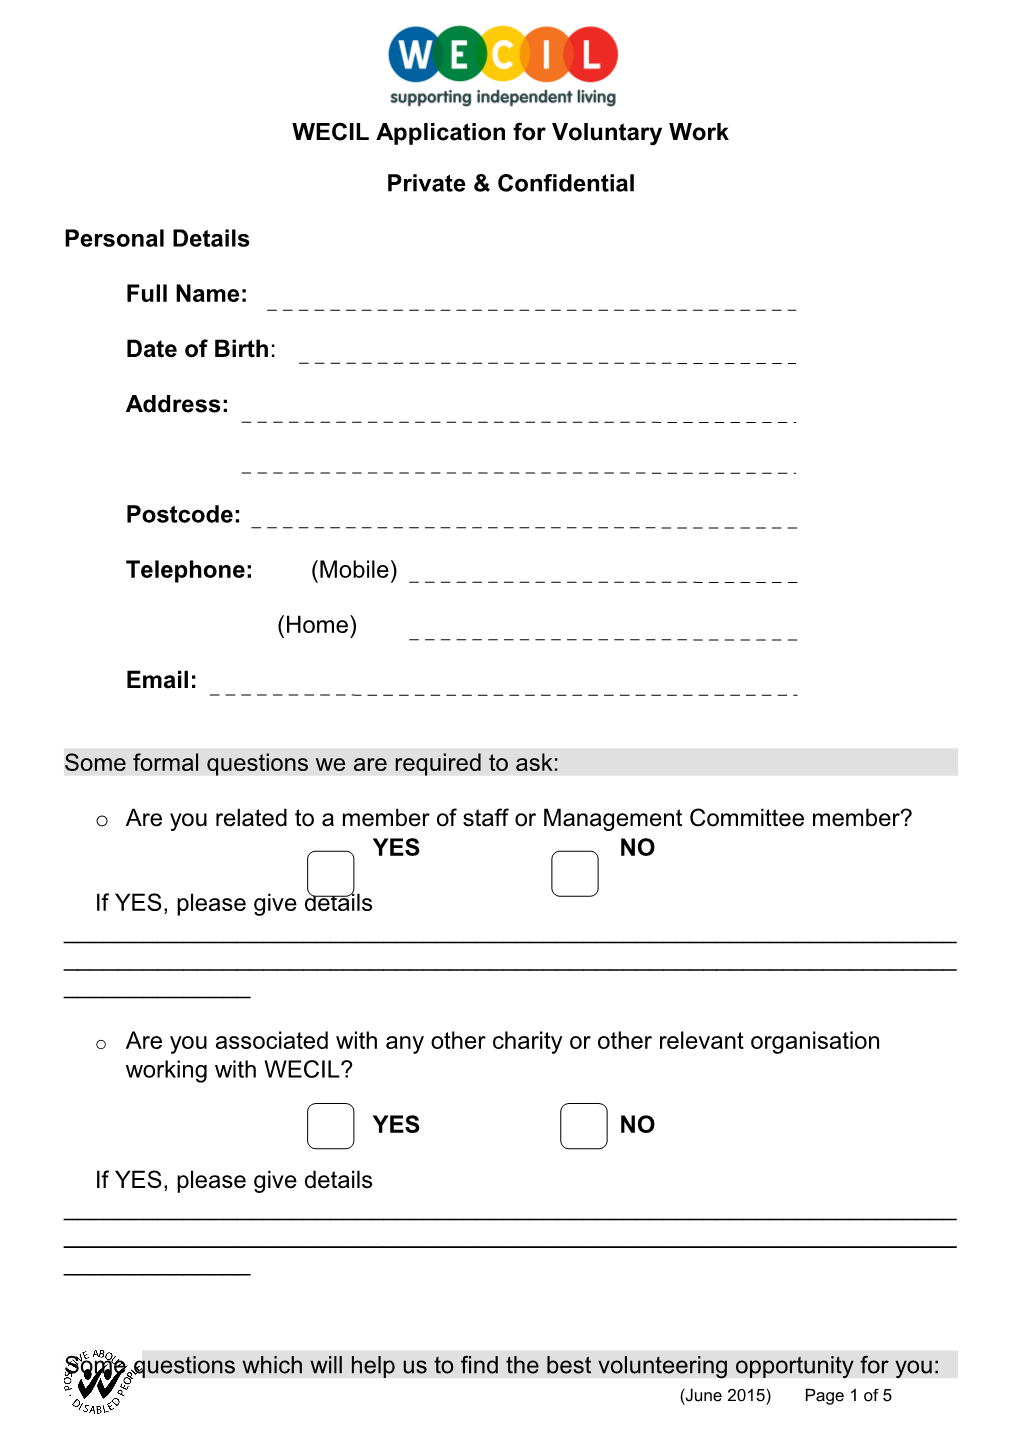 WECIL Application for Voluntary Work